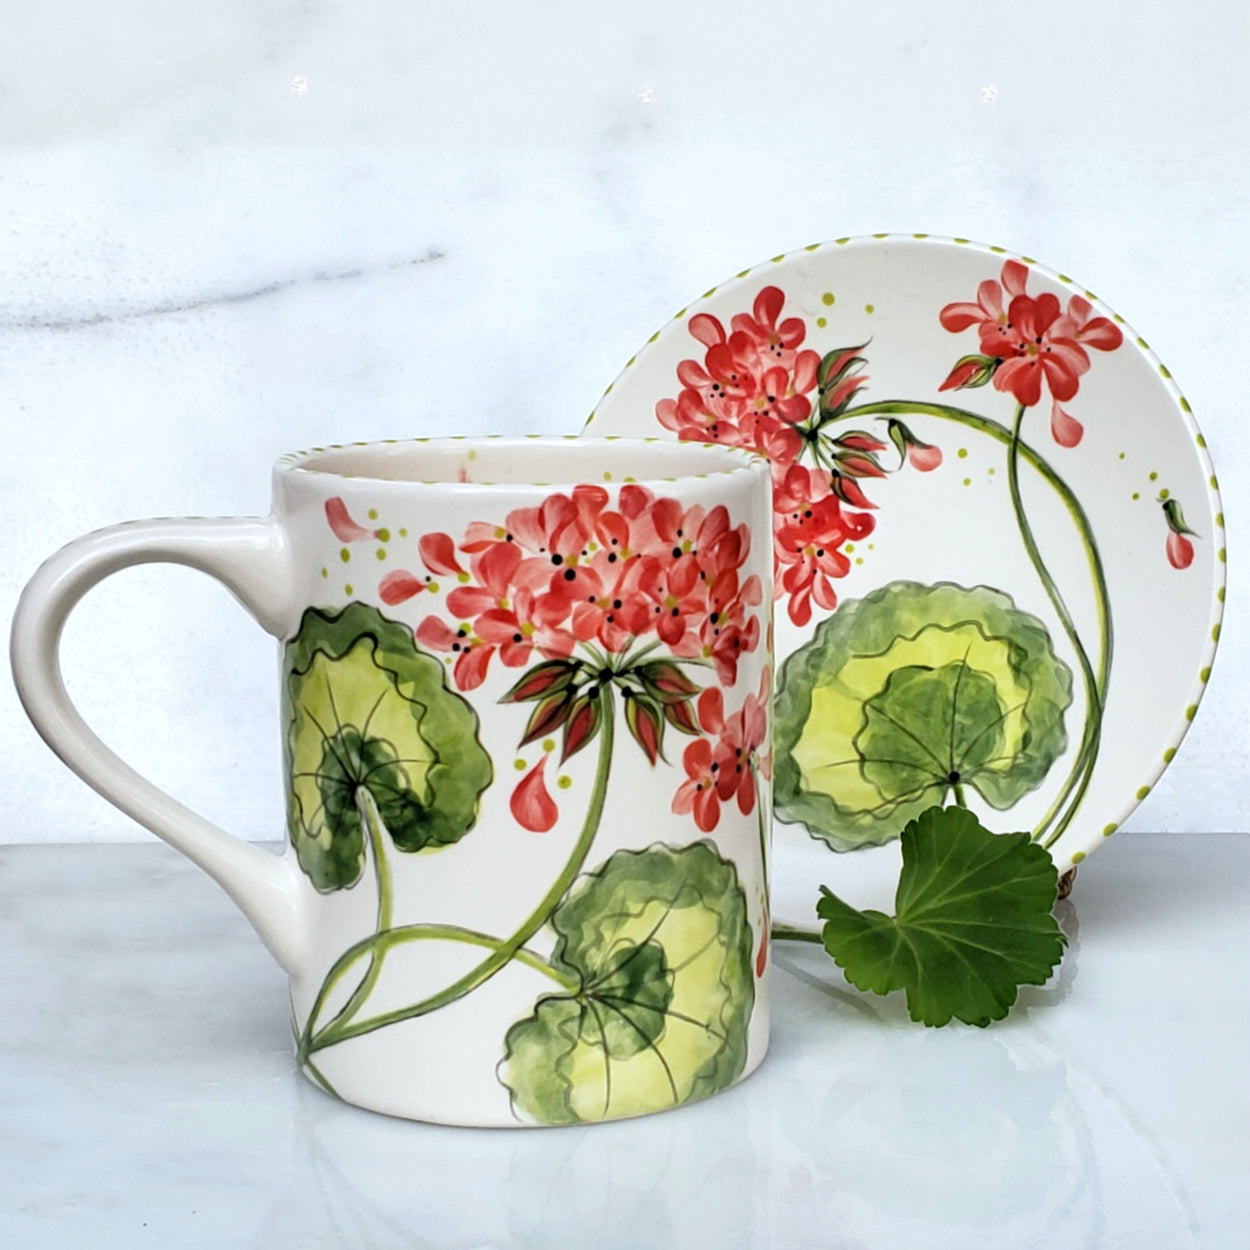 Hand Painted Geranium Mug and Dessert Plate.. beautiful peachy and red Geraniums and lime green accents make this set adorable!!! Kiln fired 